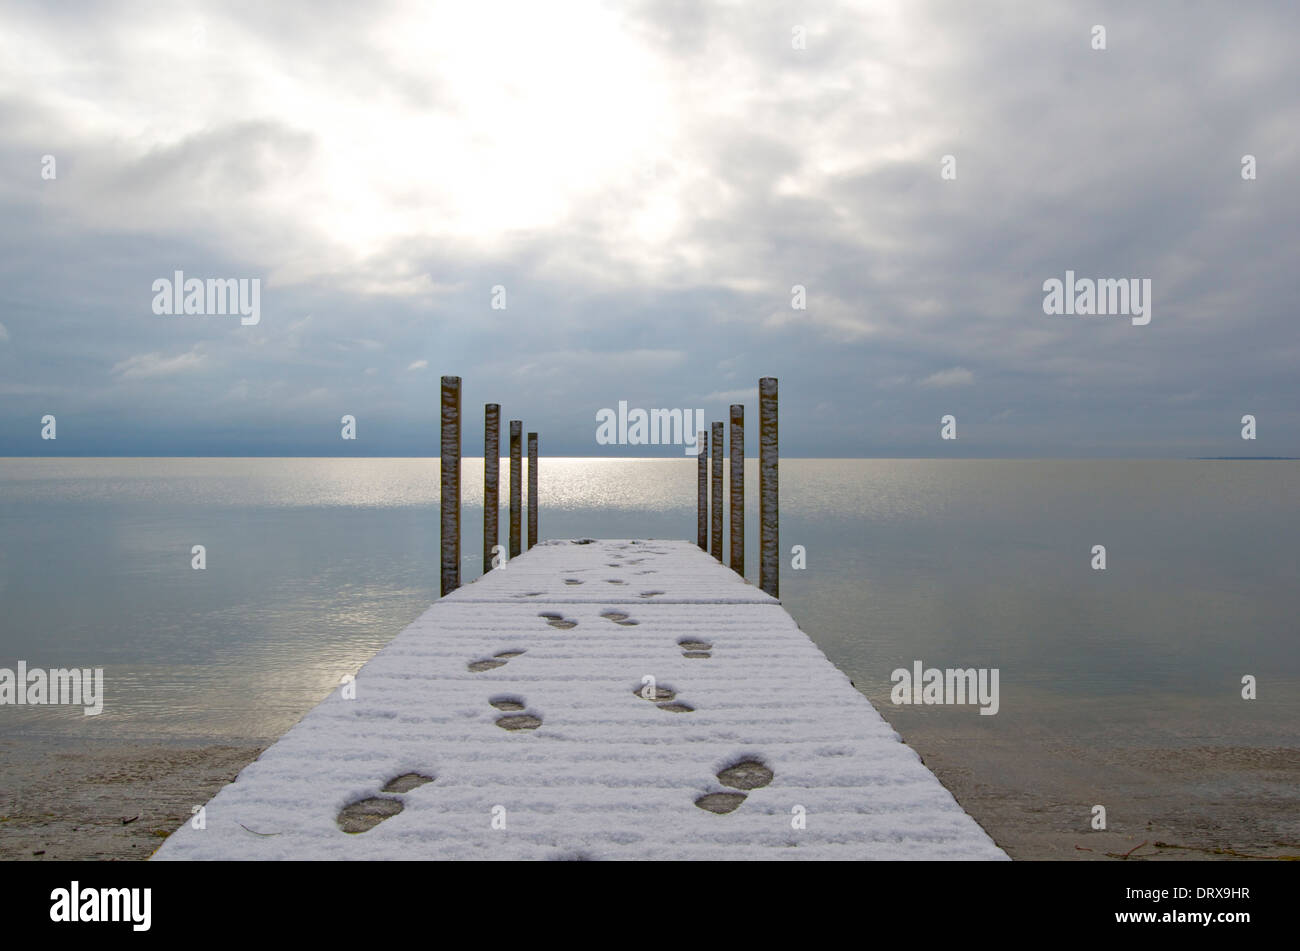 Dock with snowy surface and human footprints leading out and back Stock Photo